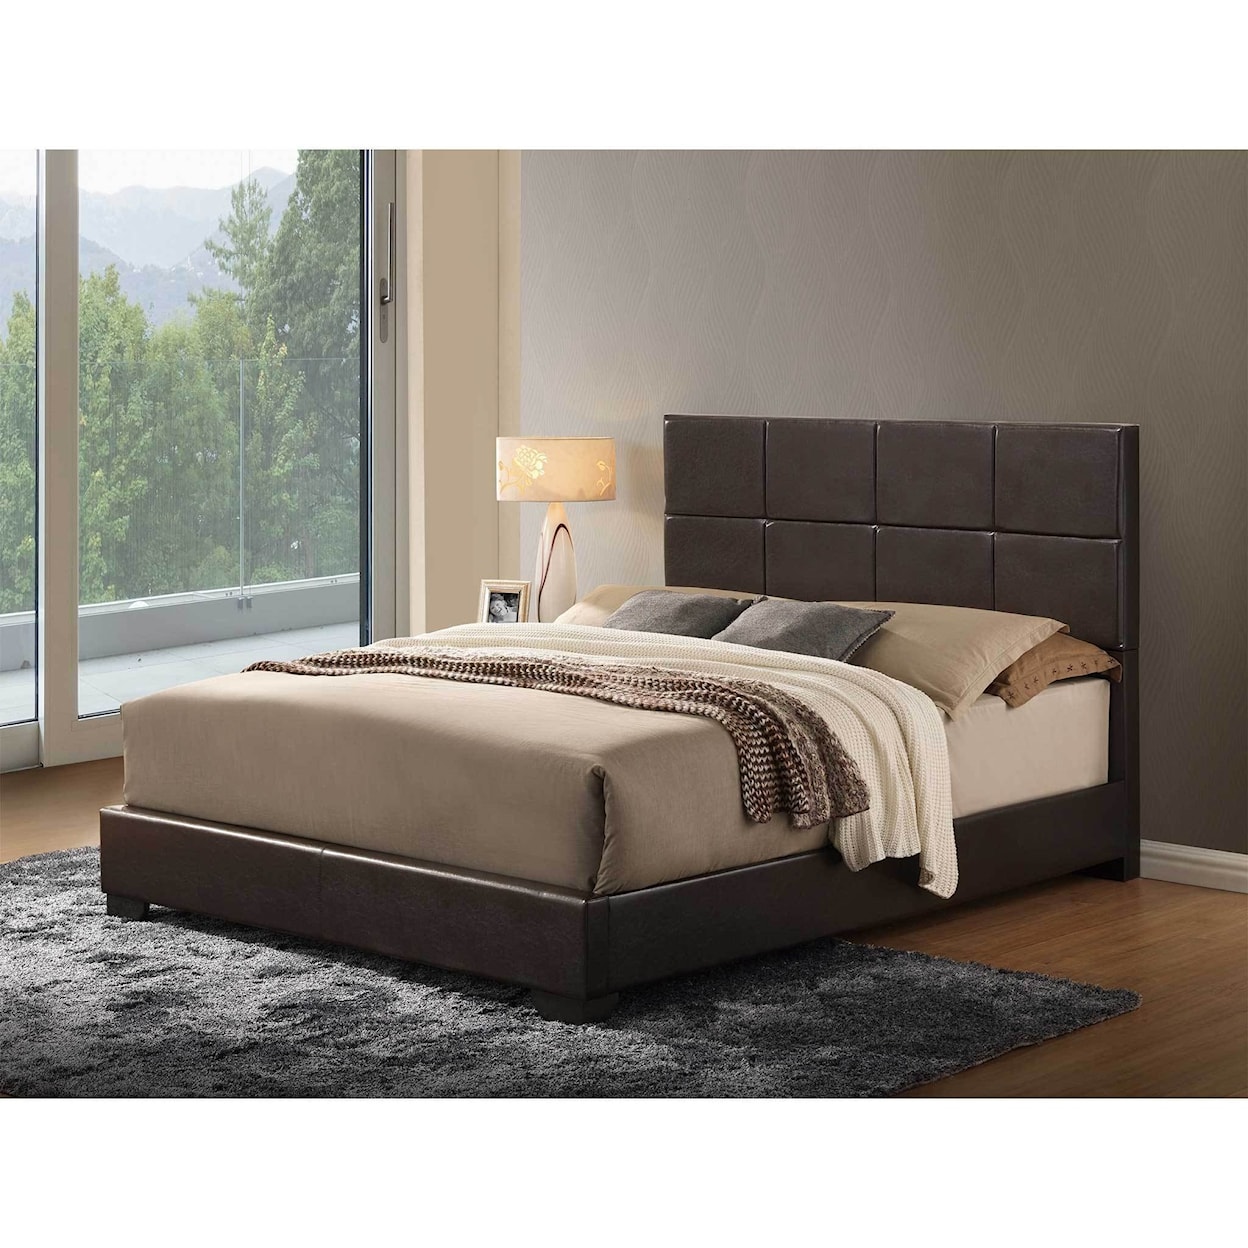 Global Furniture 8566 Upholstered Queen Bed